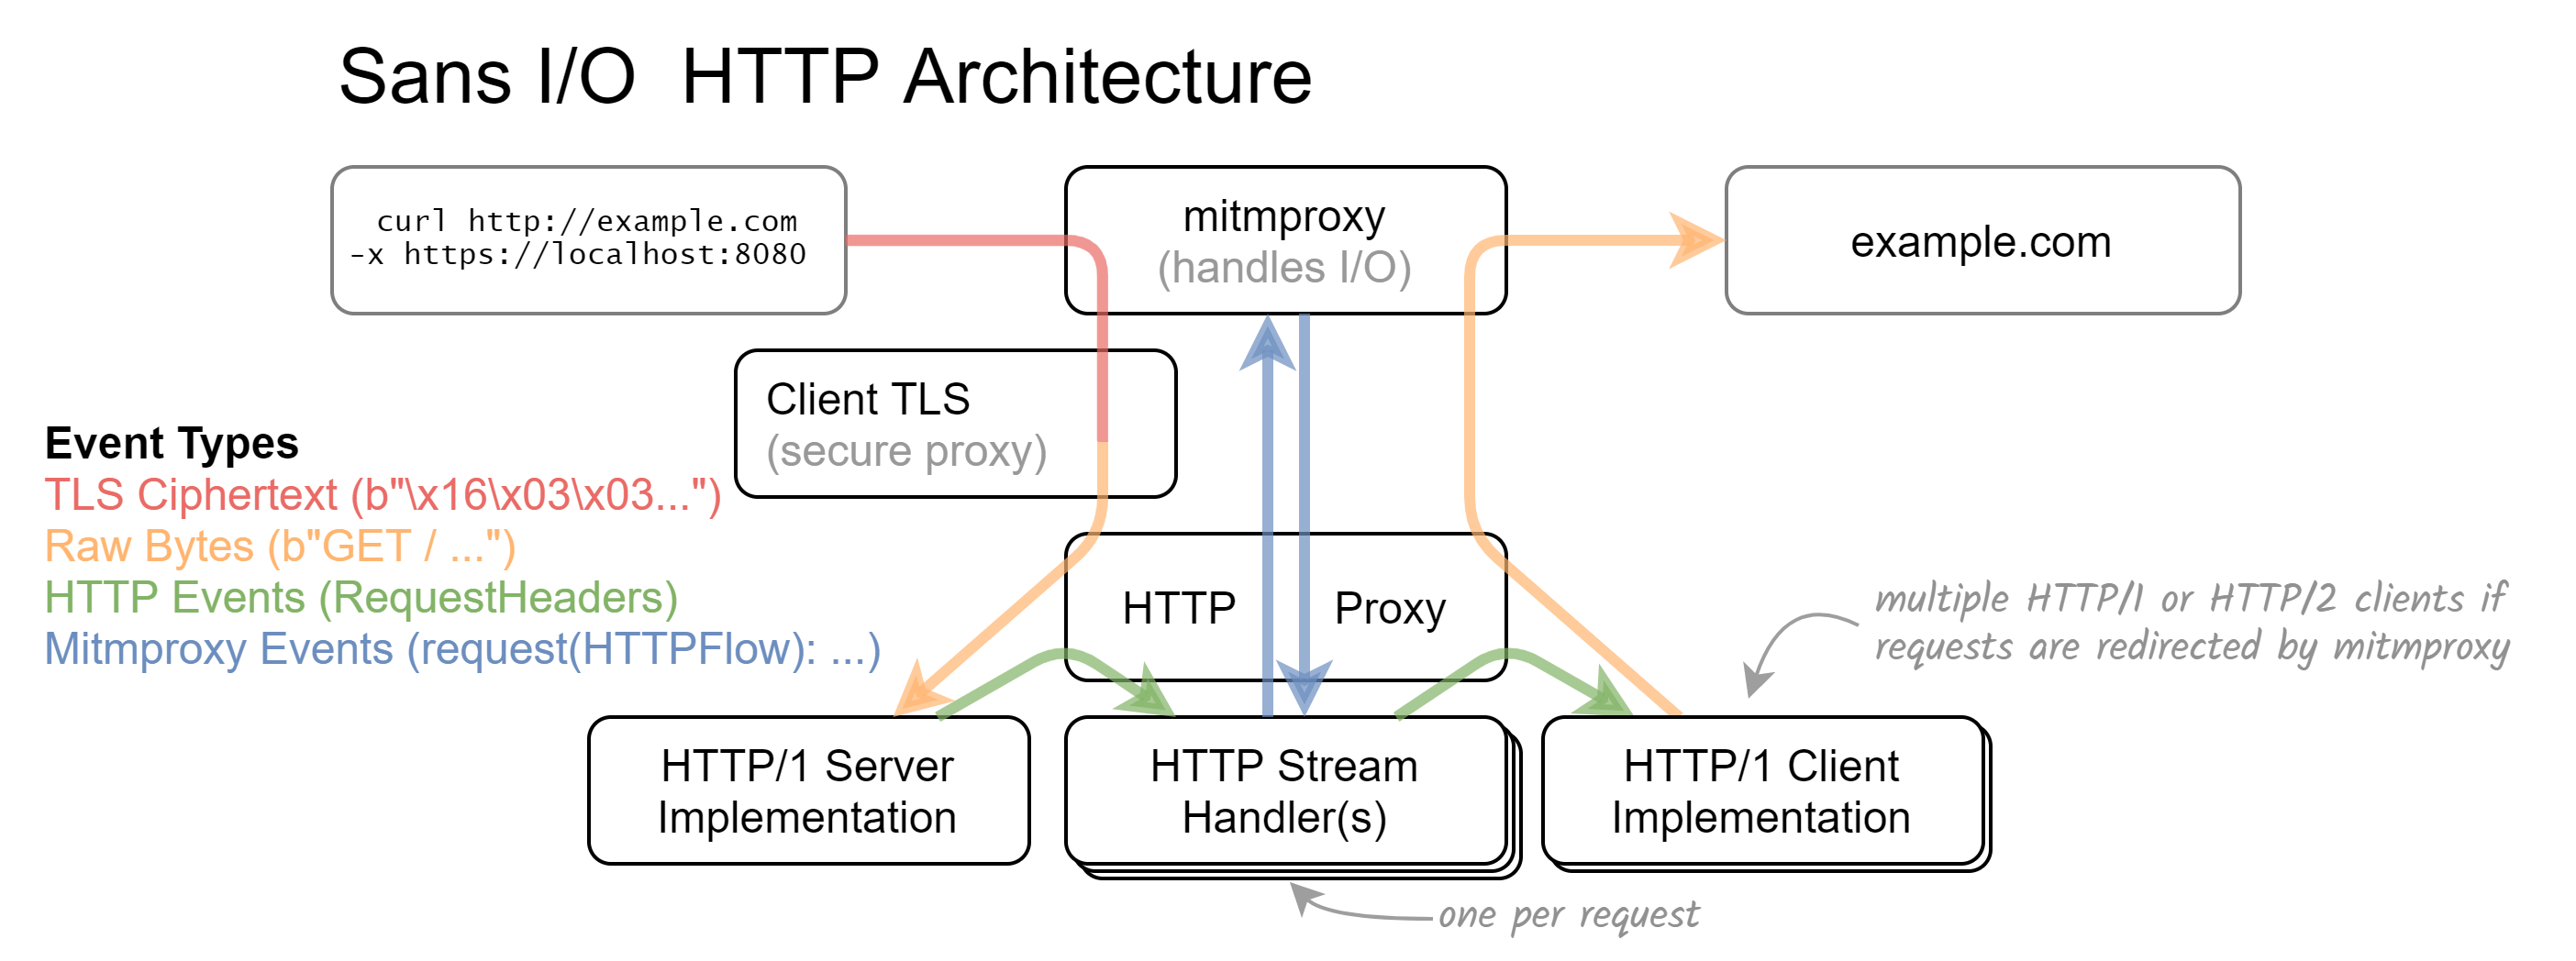 mitmproxy&rsquo;s layered proxy core. In this specific configuration, mitmproxy is run as a Secure Web Proxy where the client establishes a TLS connection with the proxy first. This protects possible plaintext communication between client and proxy.